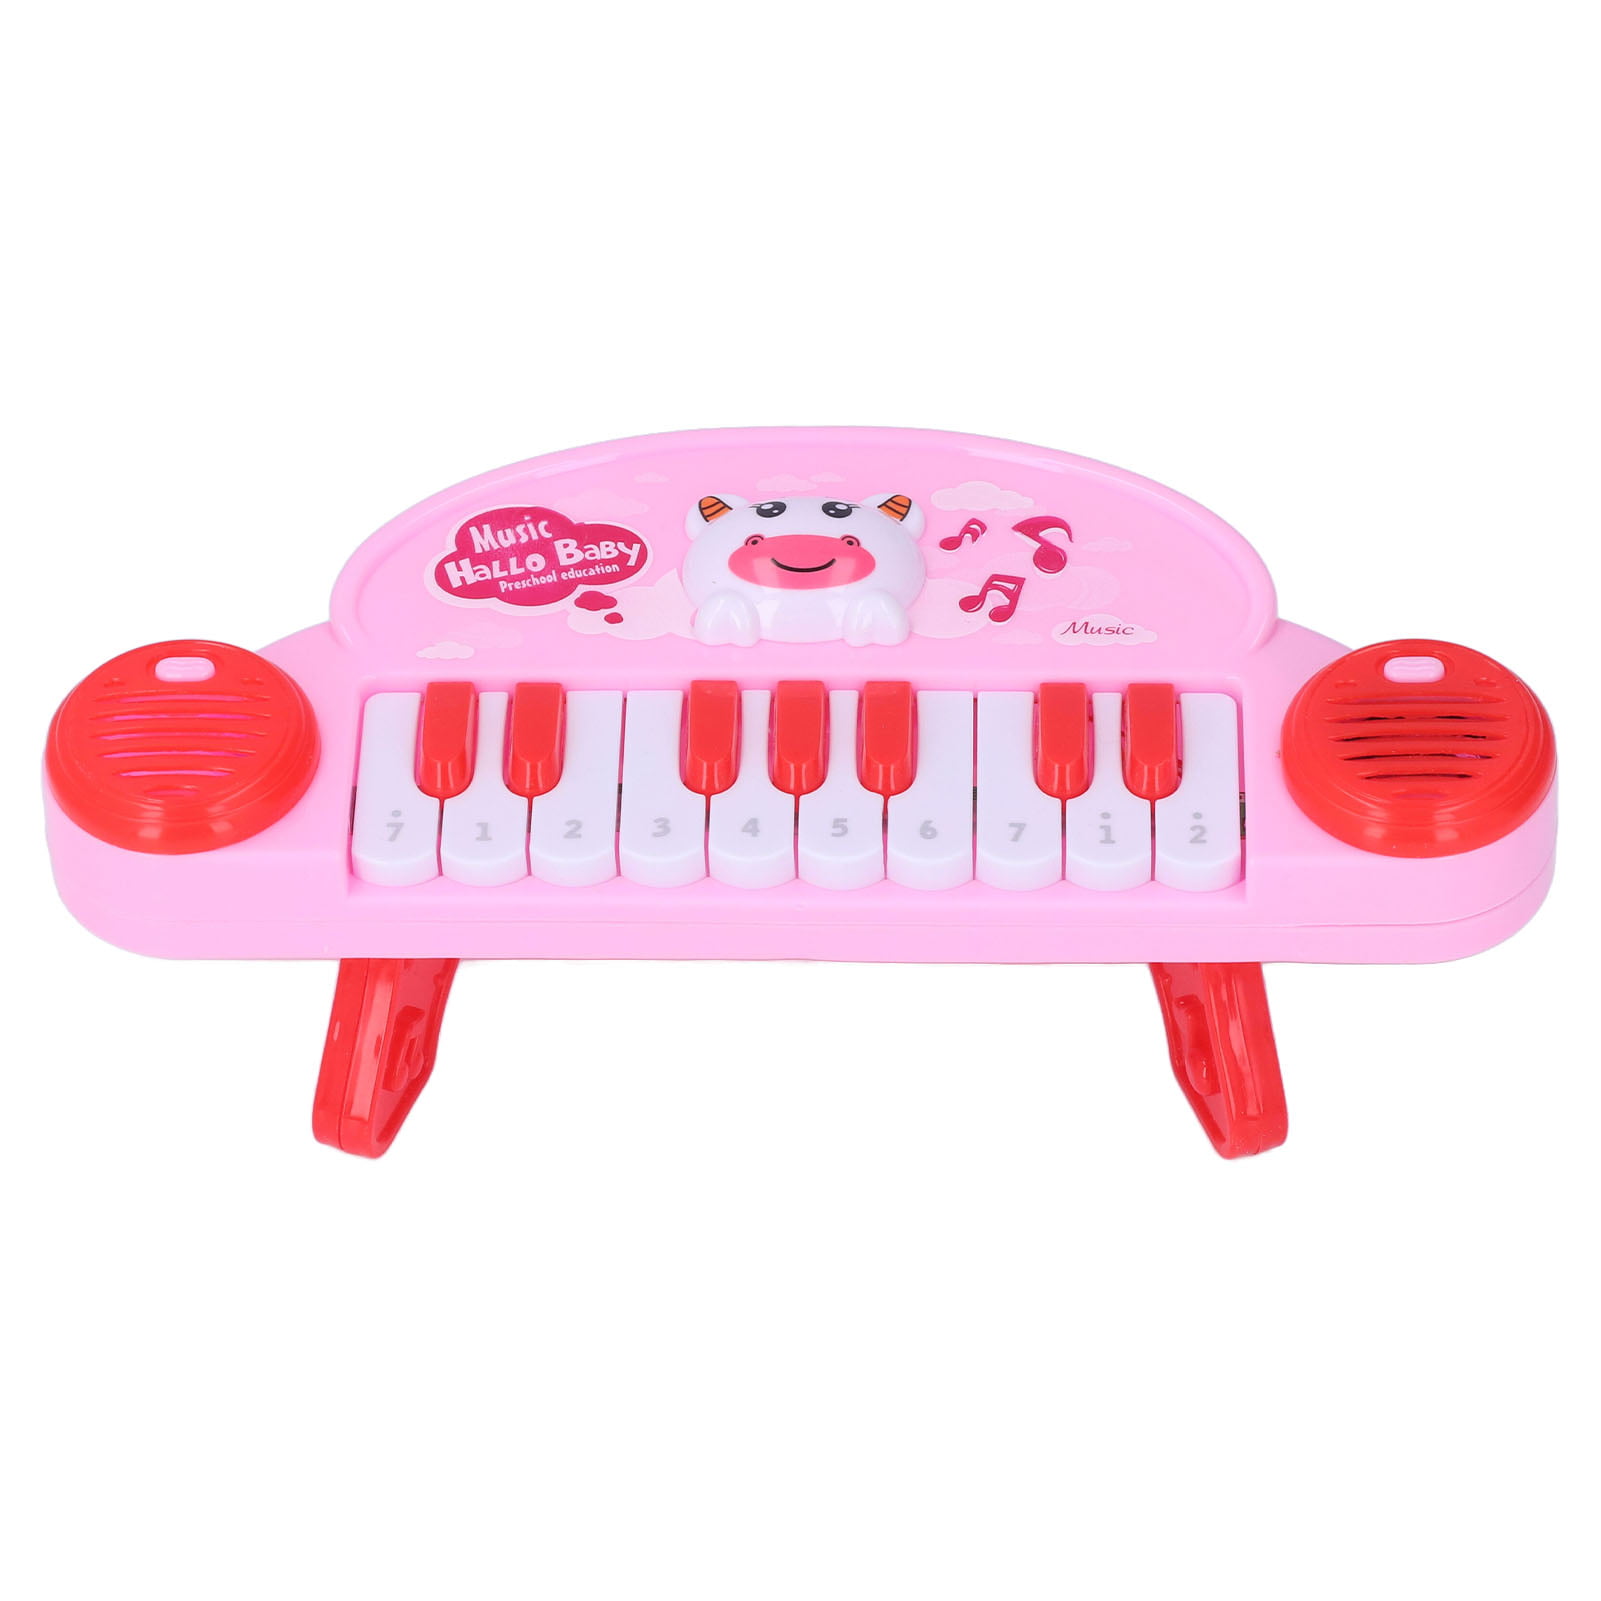 Mini Tripod 25 Keys Music & Sound Toddler Piano With Microphone Toy For Children 